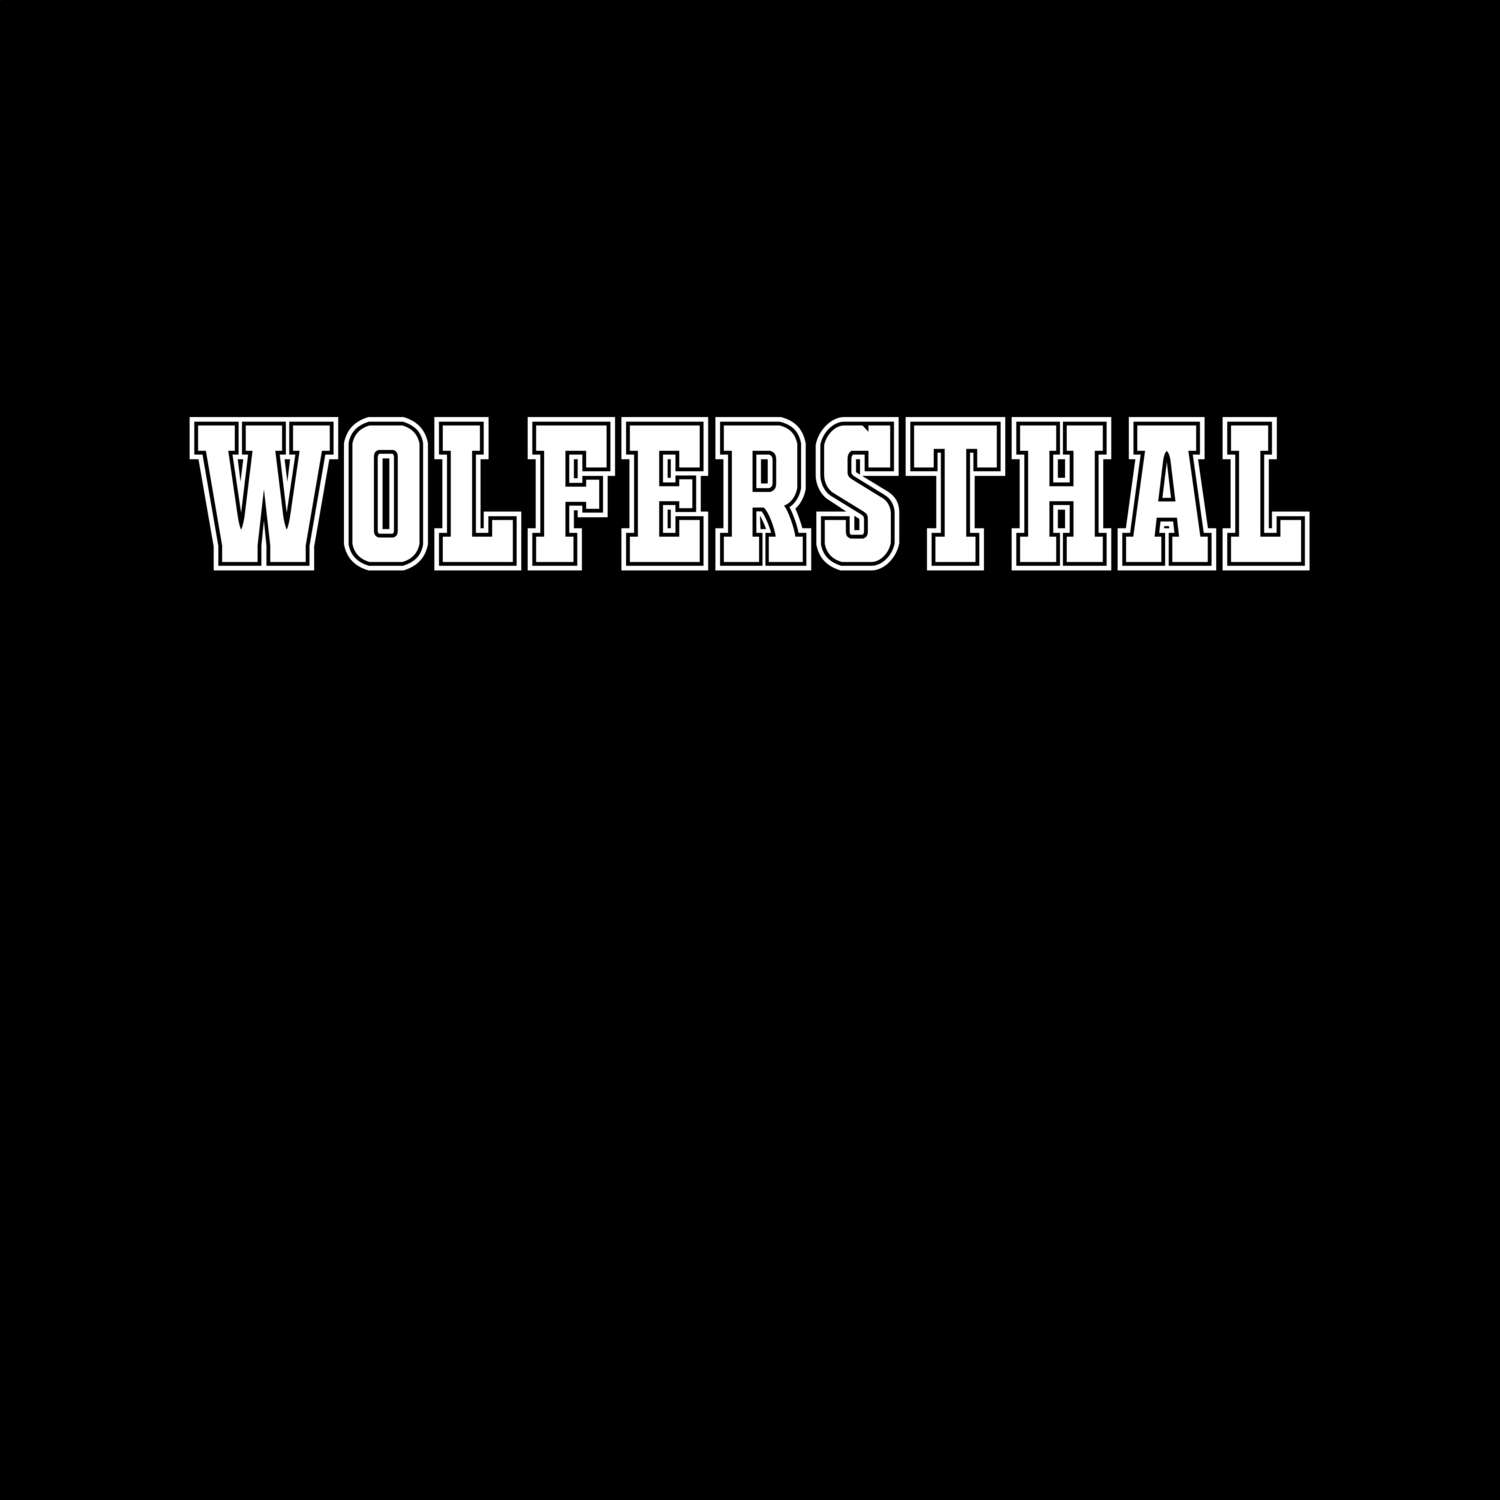 Wolfersthal T-Shirt »Classic«